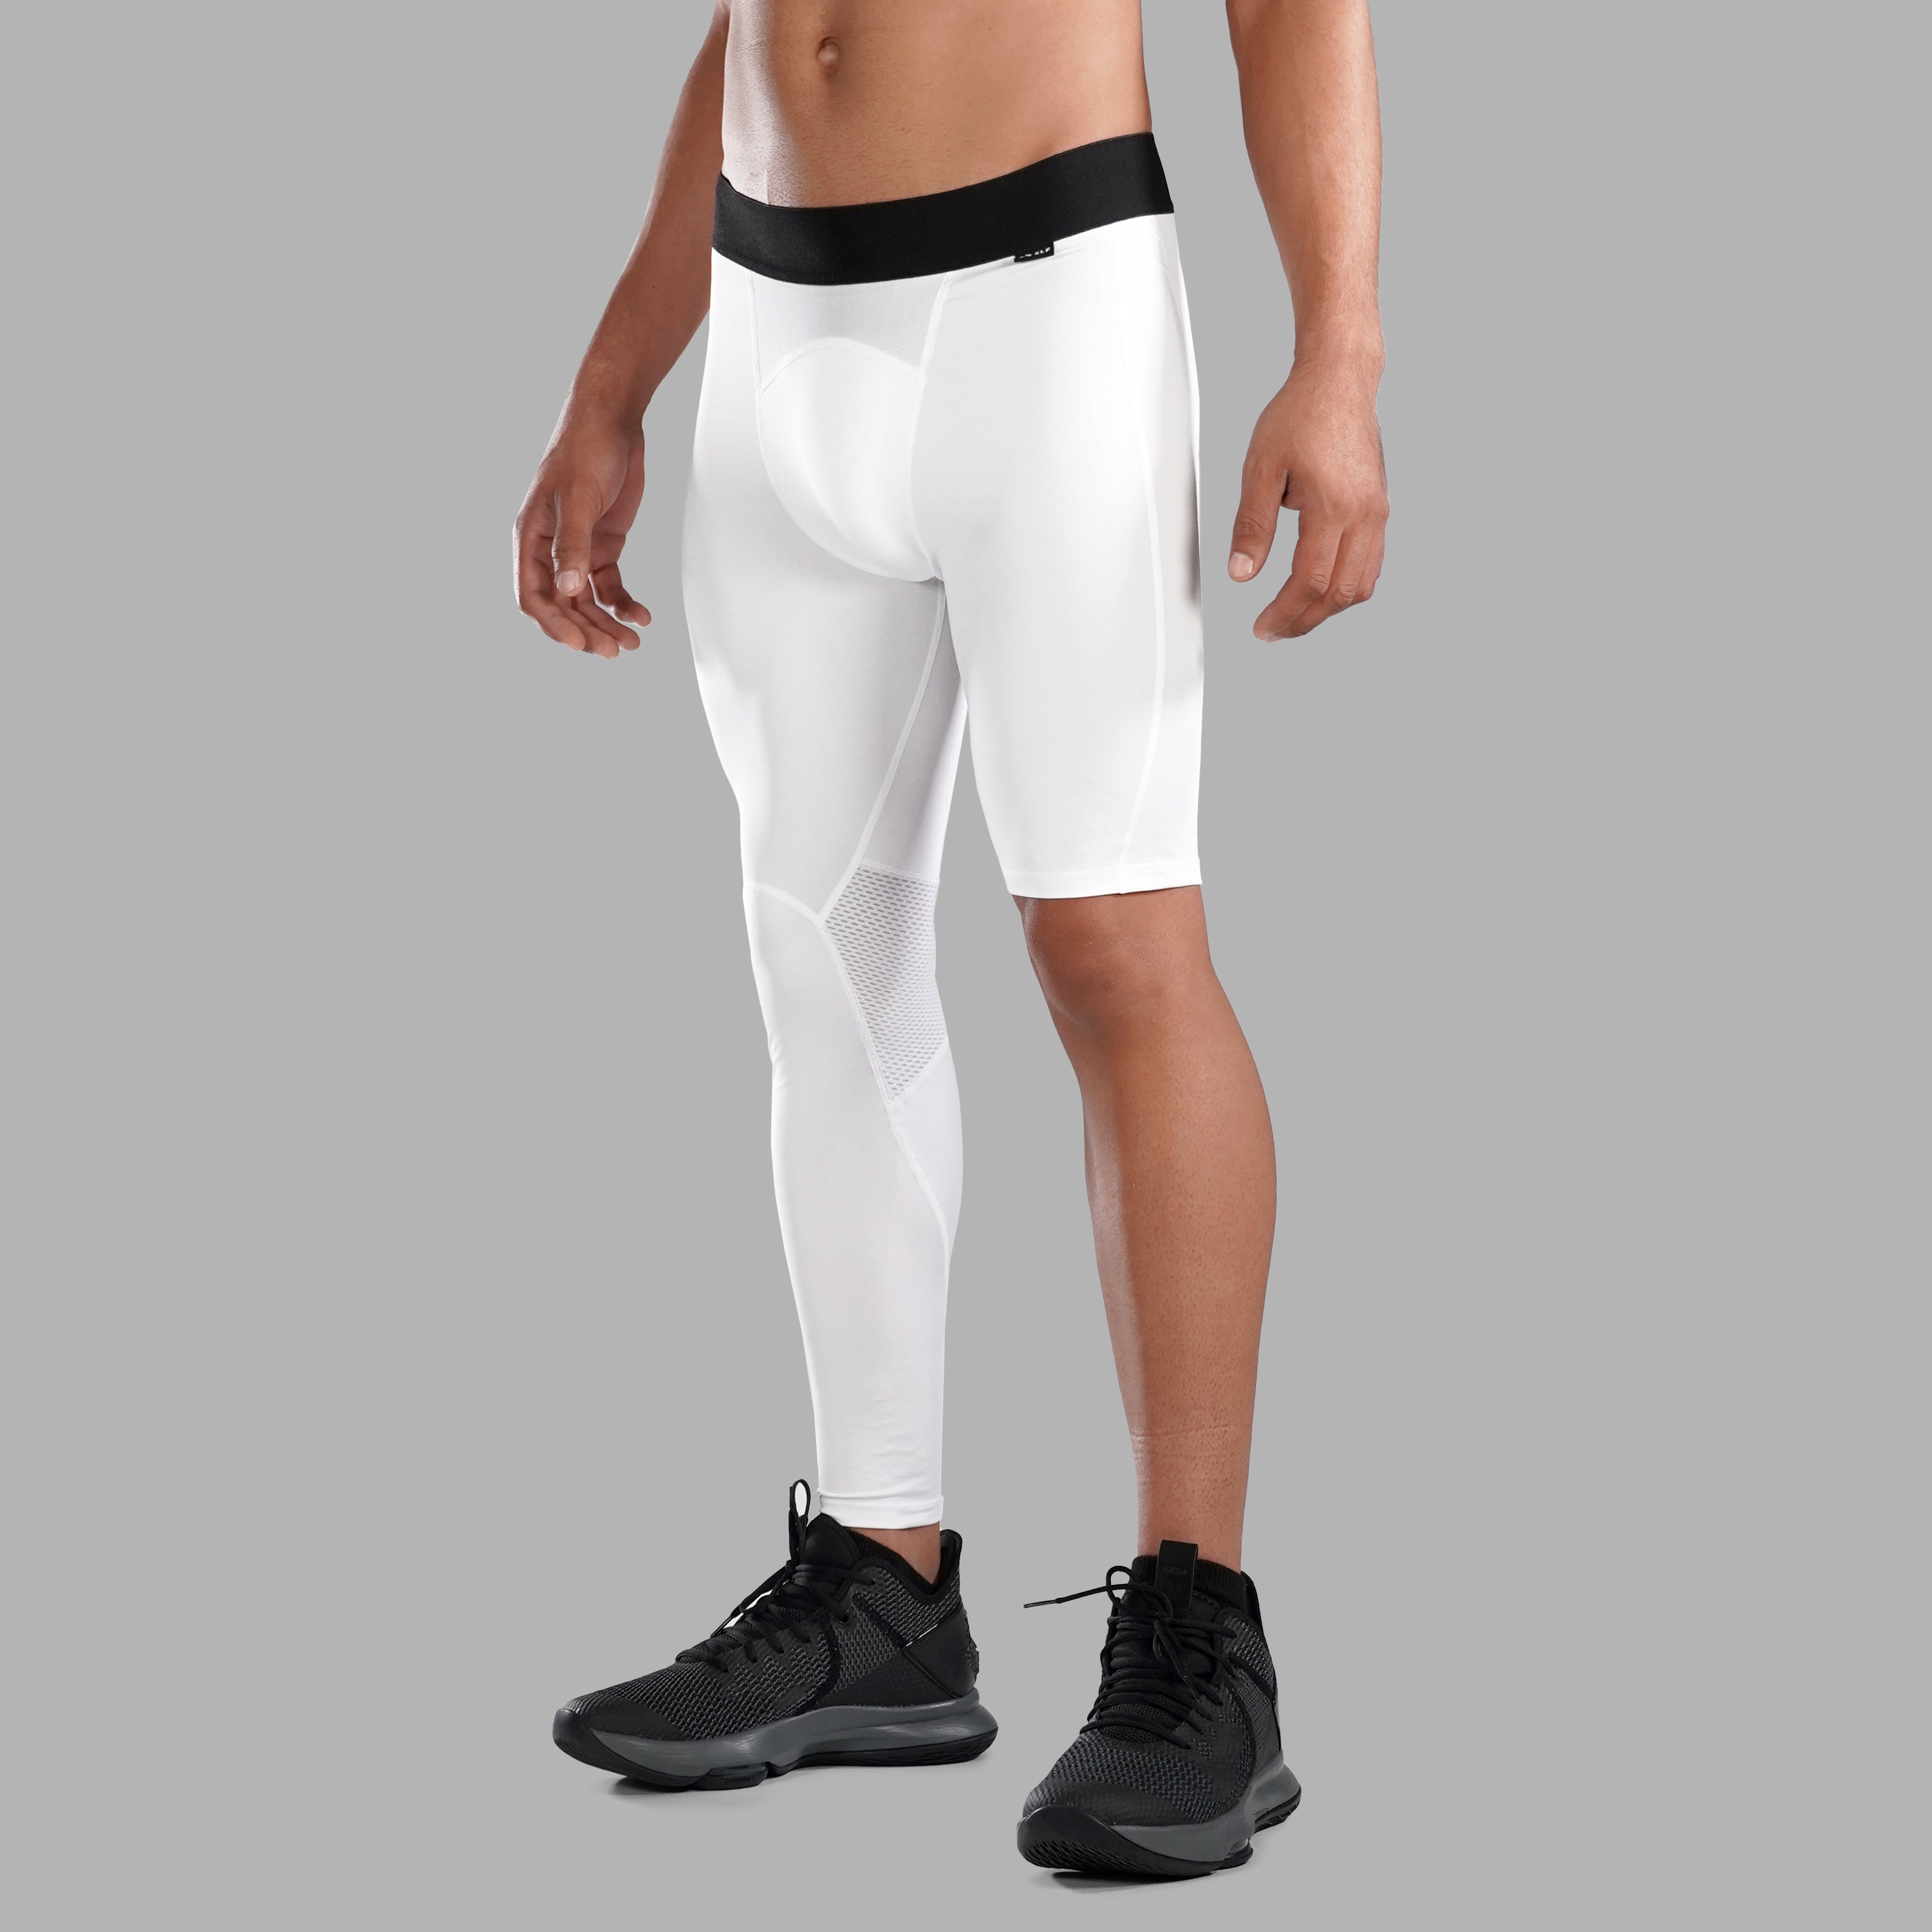 One Leg Compression Tights (White) - For Basketball, Football